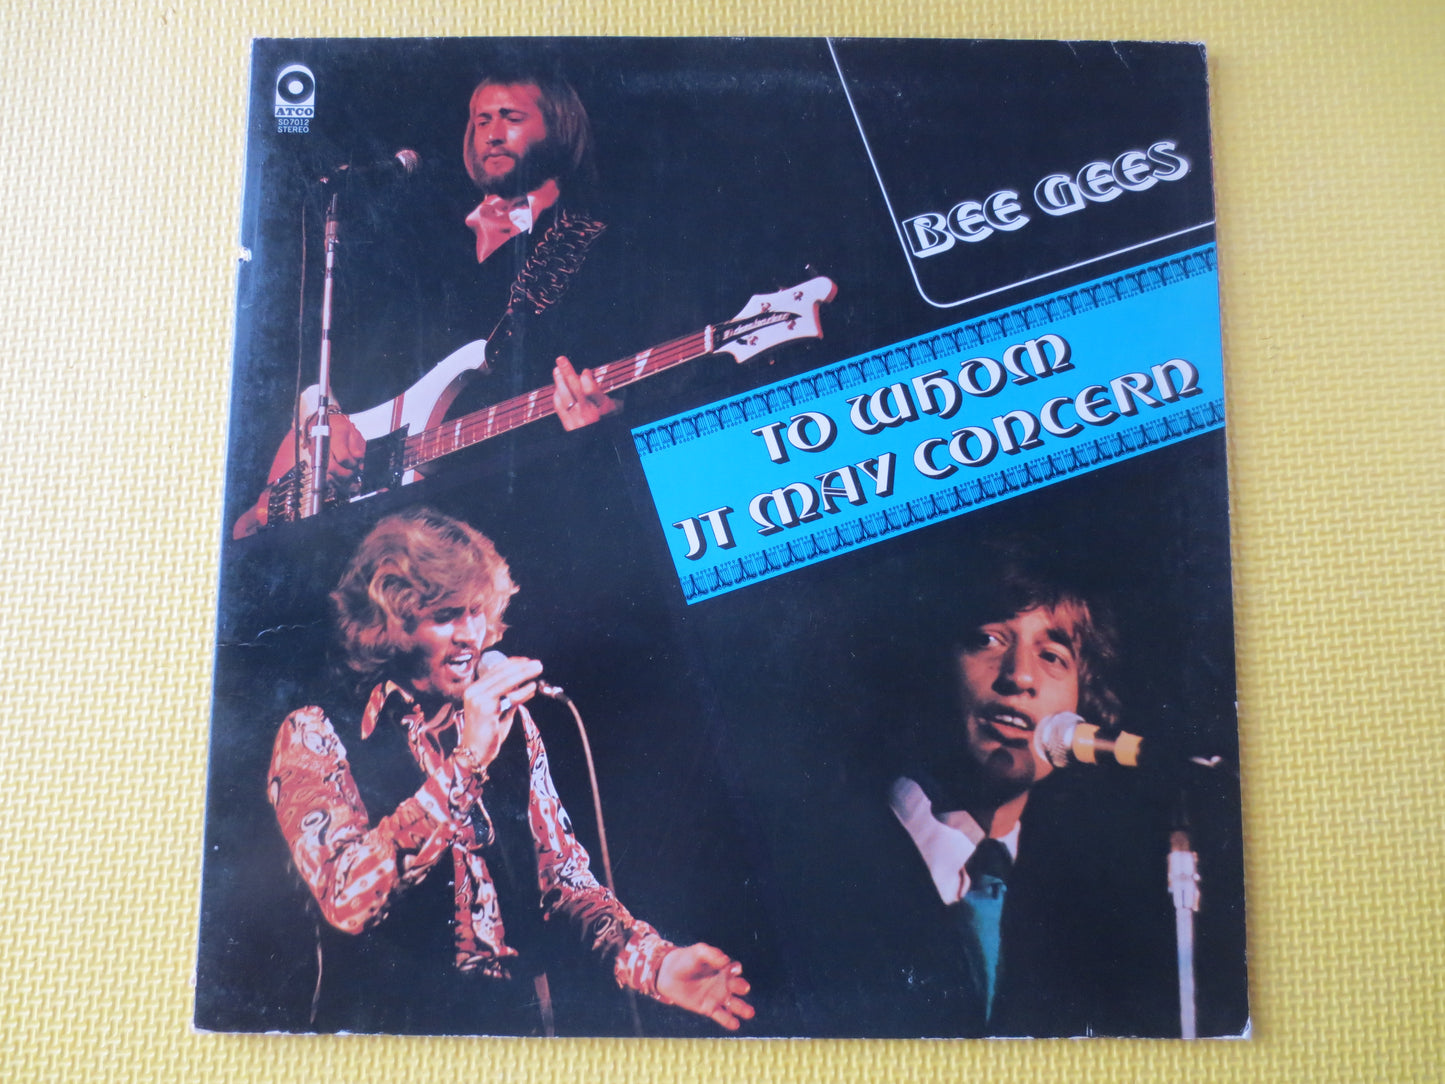 The BEE GEES, To Whom It May Concern, Pop Records, Vinyl, Bee Gees Records, Vinyl Records, Bee Gees Albums, 1972 Records